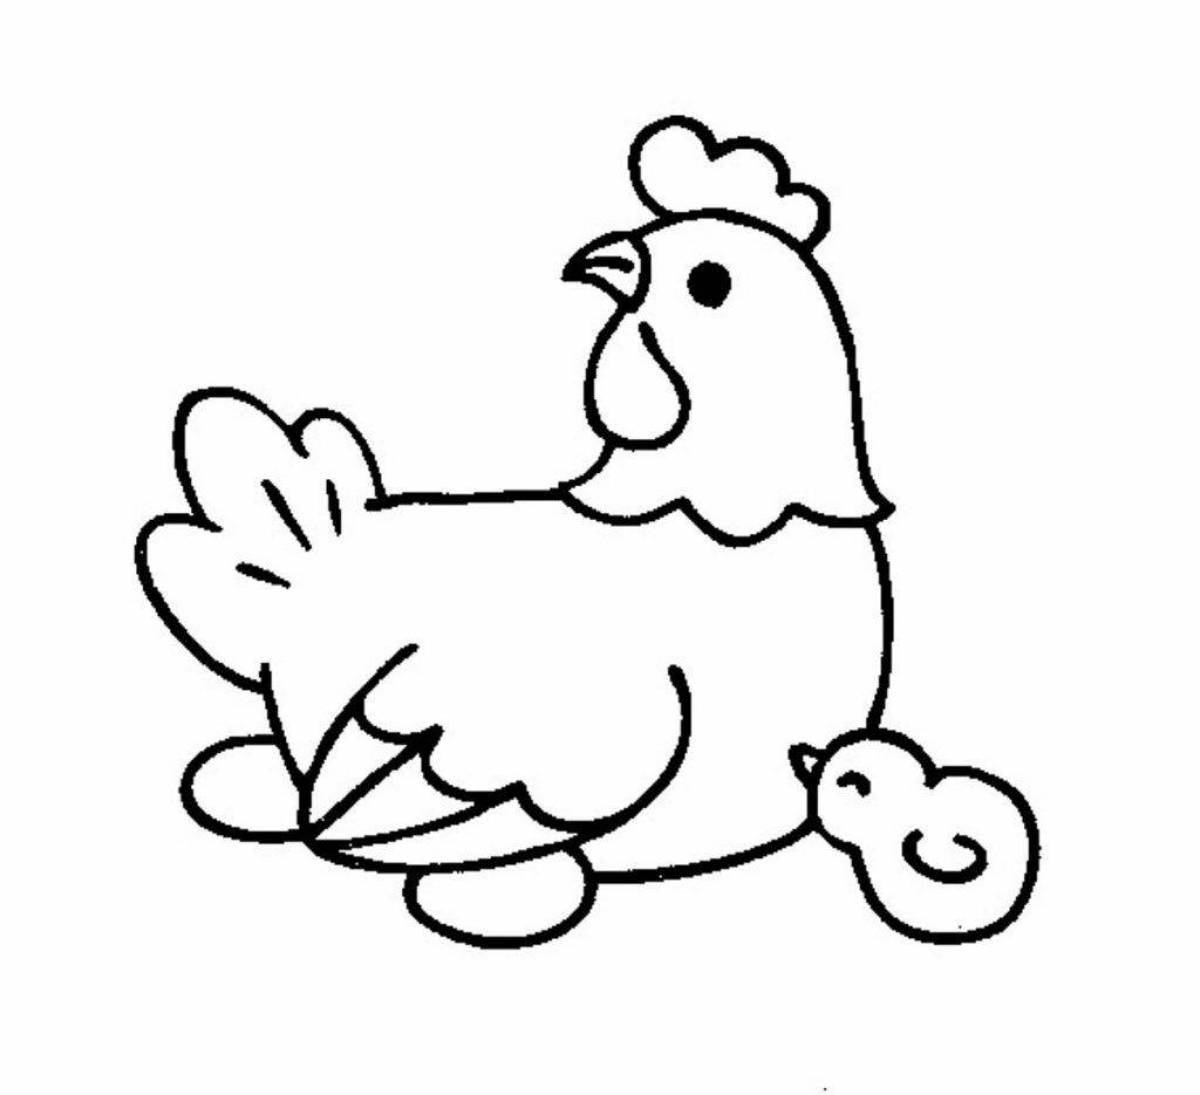 Fluffy chicken coloring book